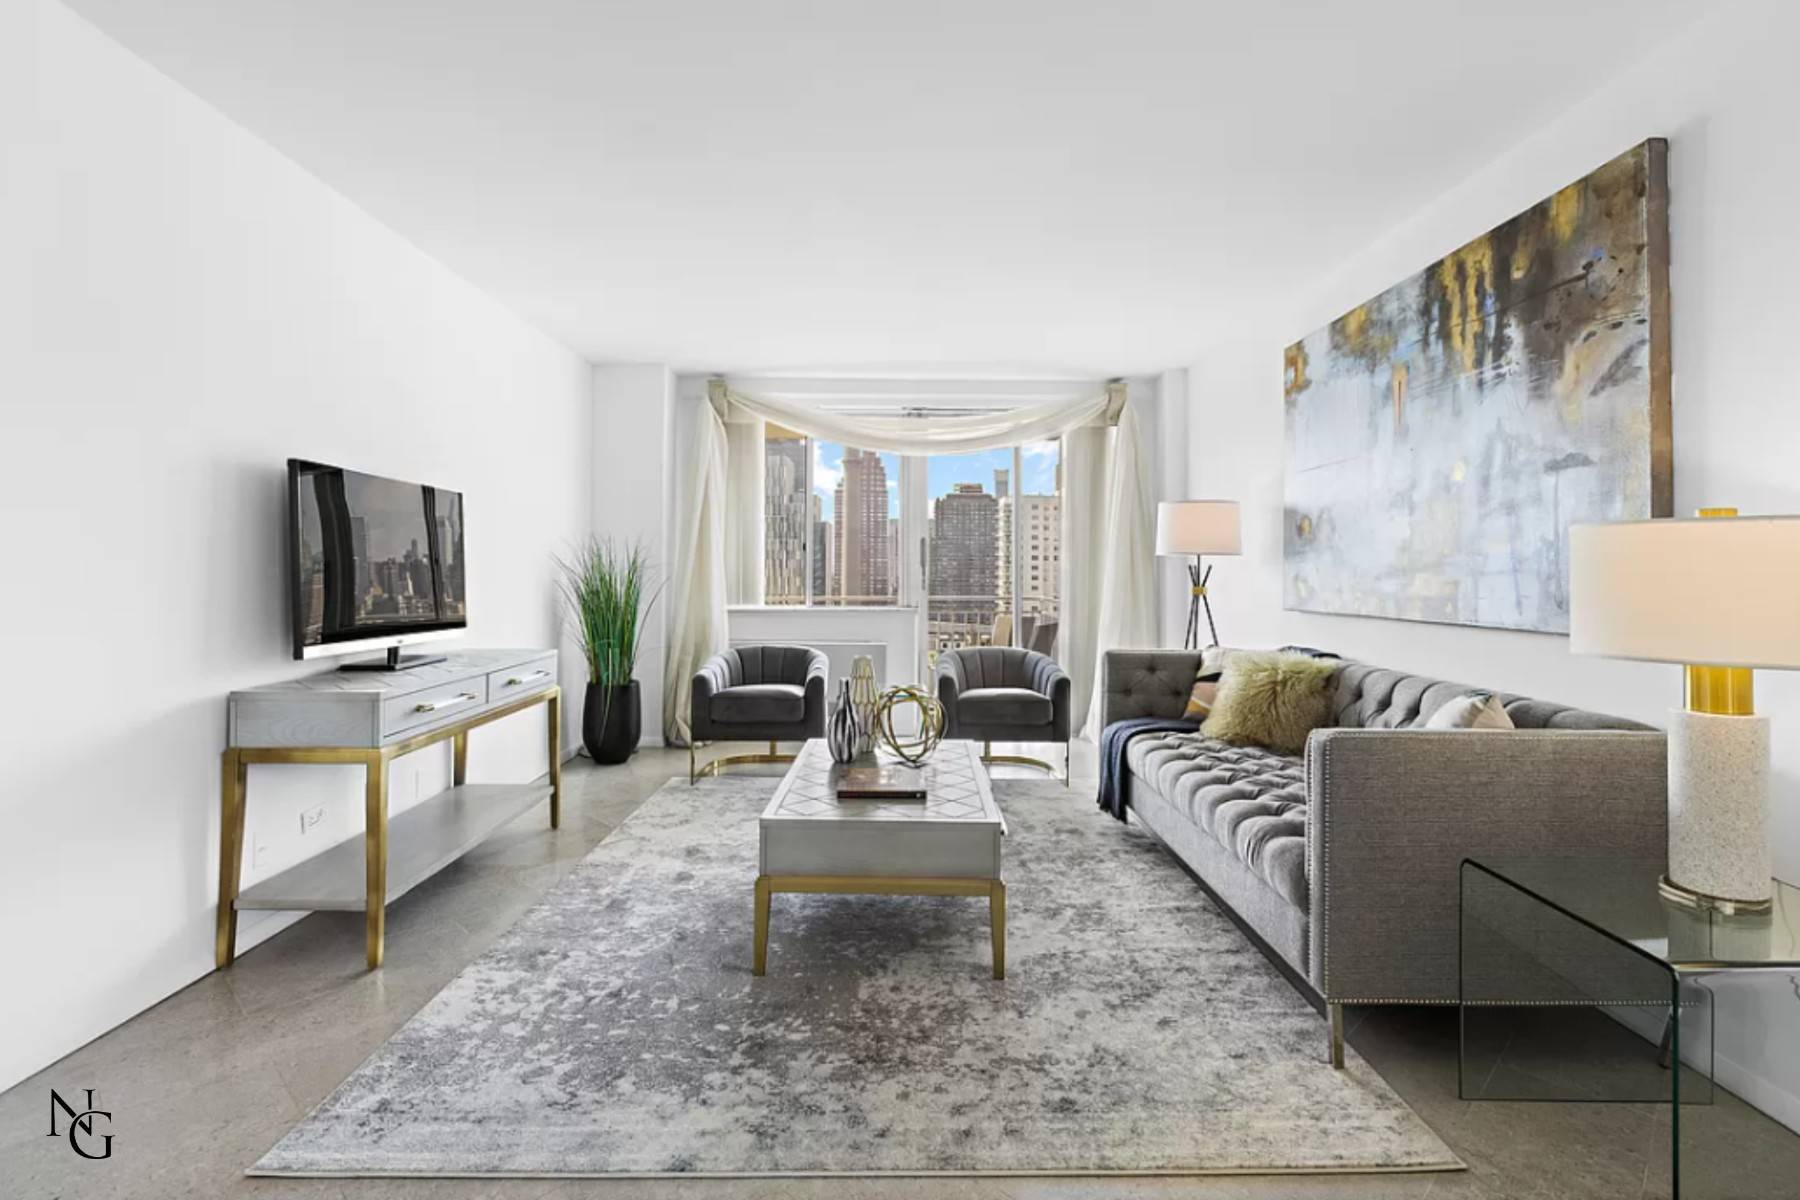 From the moment you enter into the large entry foyer of this high floor coveted 2 bed, 2 1 2 bathroom palace in the sky, you will fall in love.